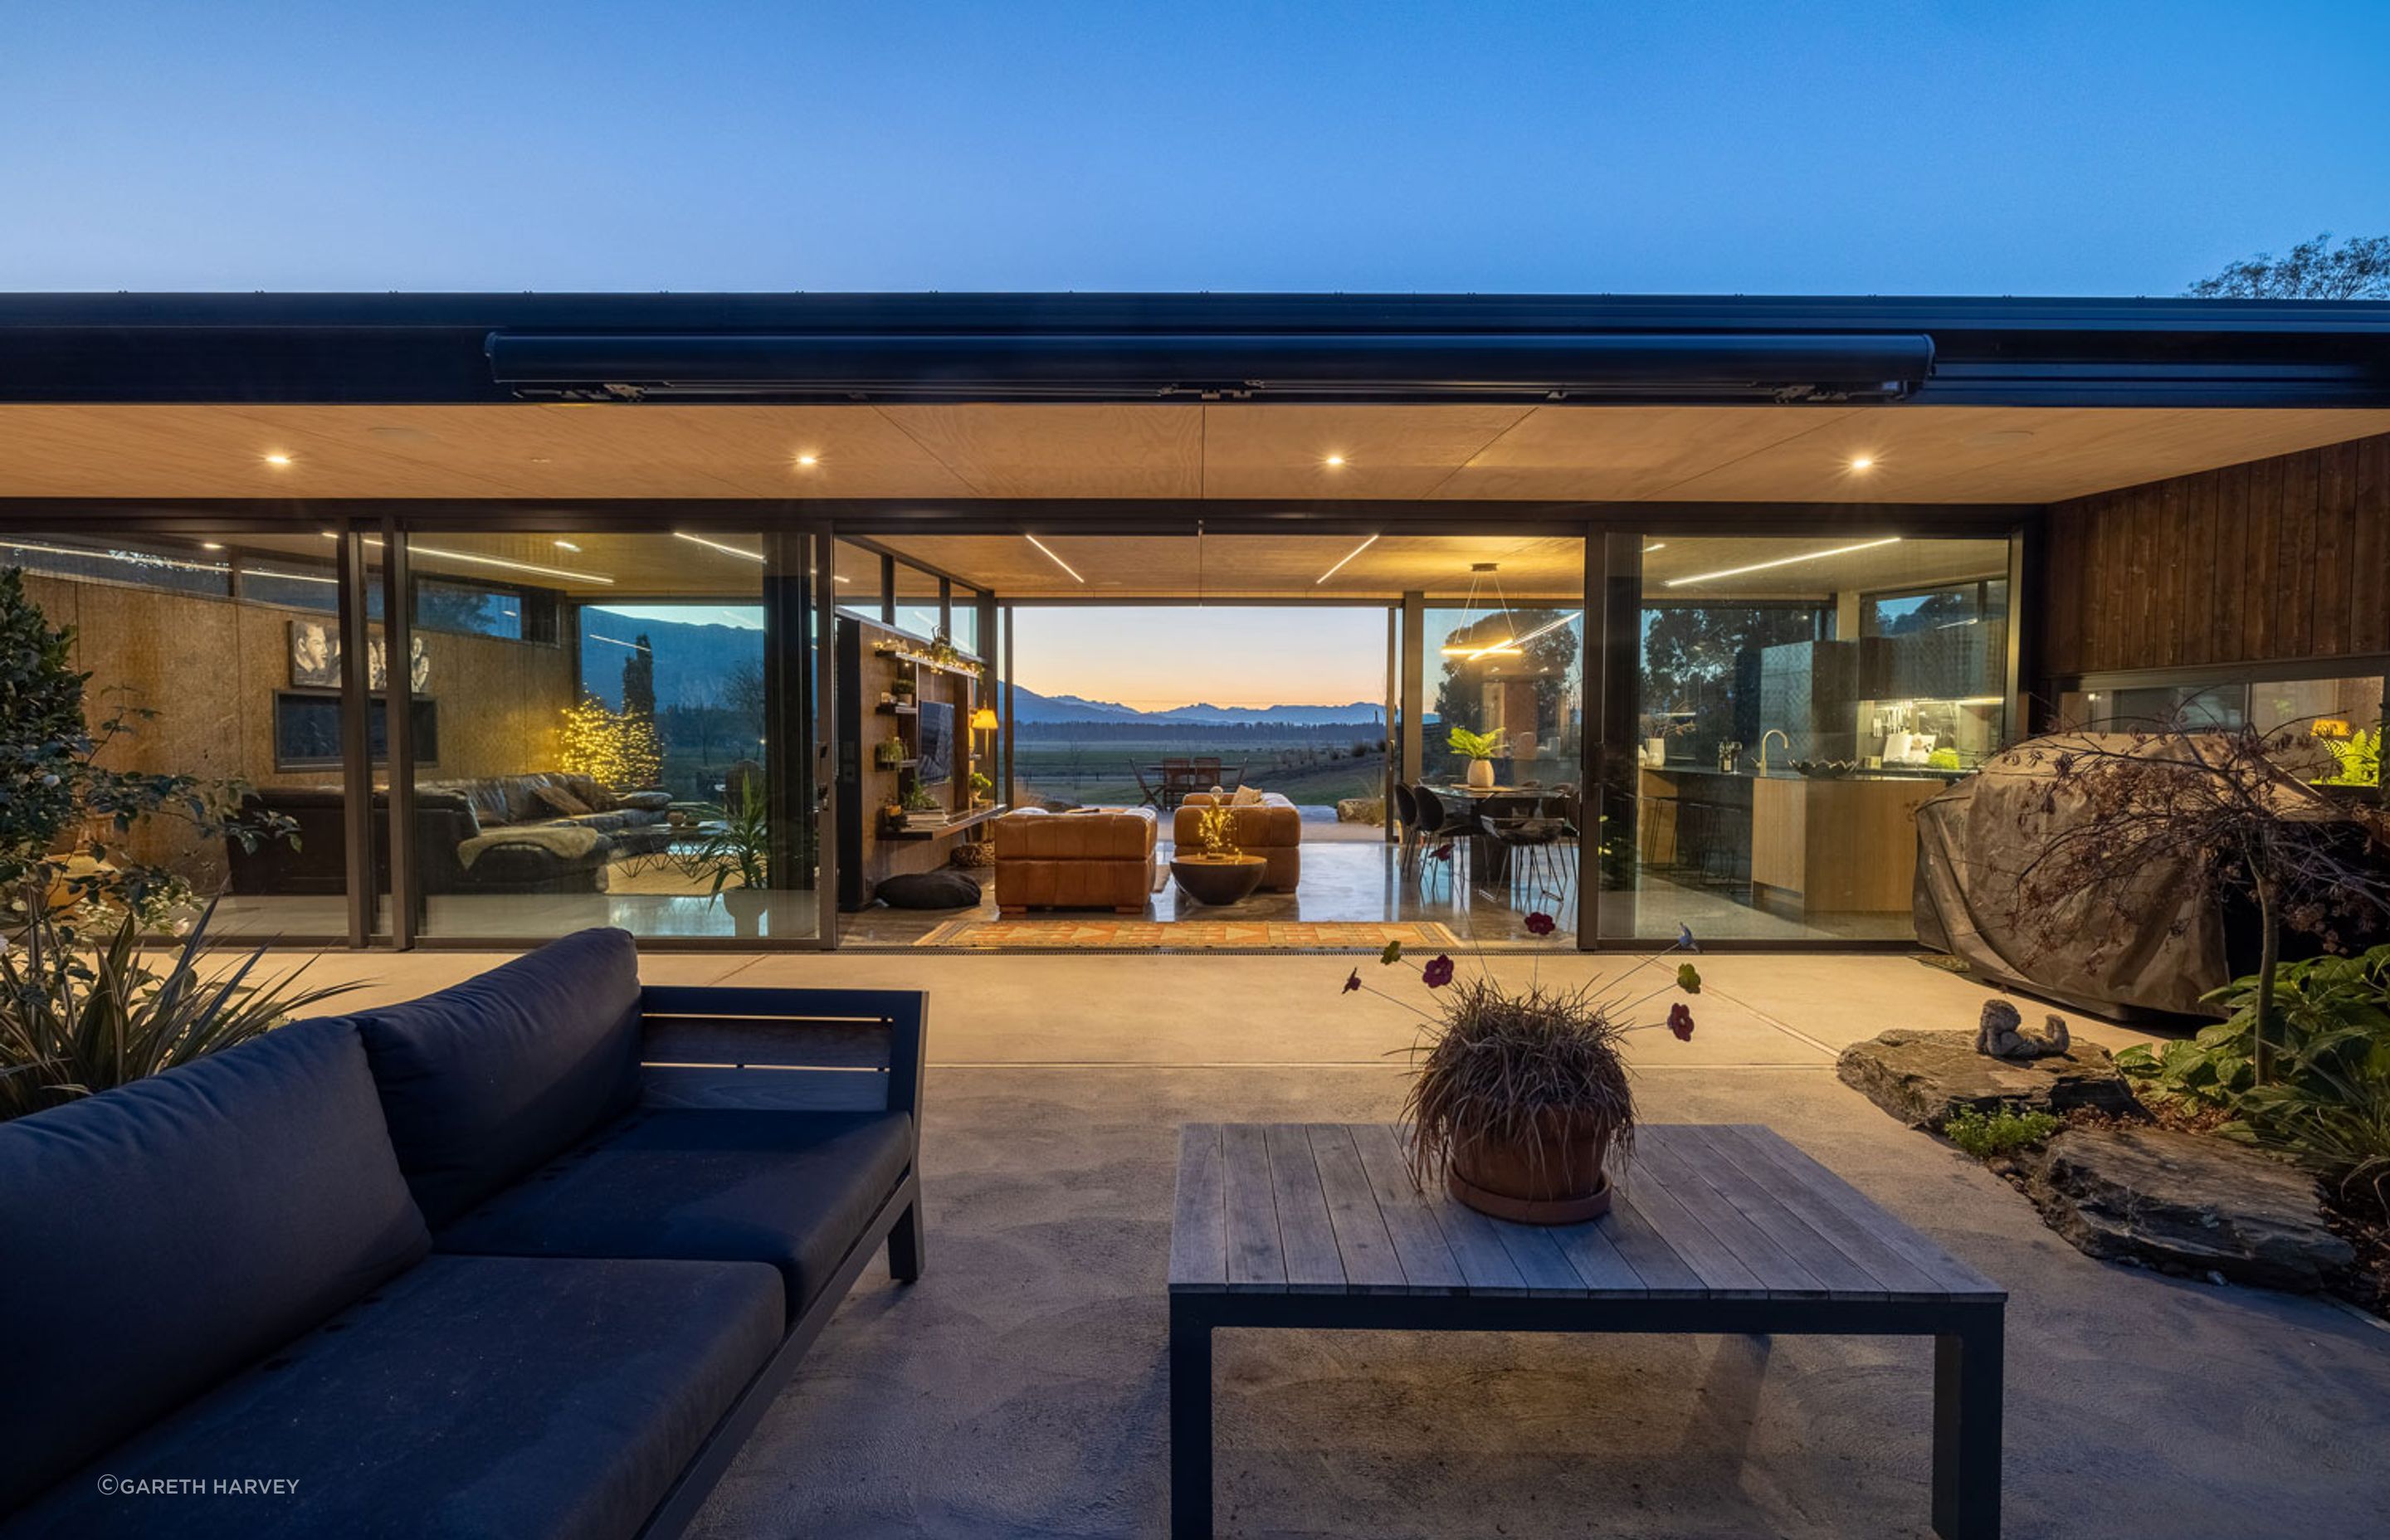 The outdoor living courtyard has a view through the interior living space as a lens to the wider landscape, says Gary. With all the glass, the main feature is the roof floating above the landscape. “It’s not just your ordinary home.”